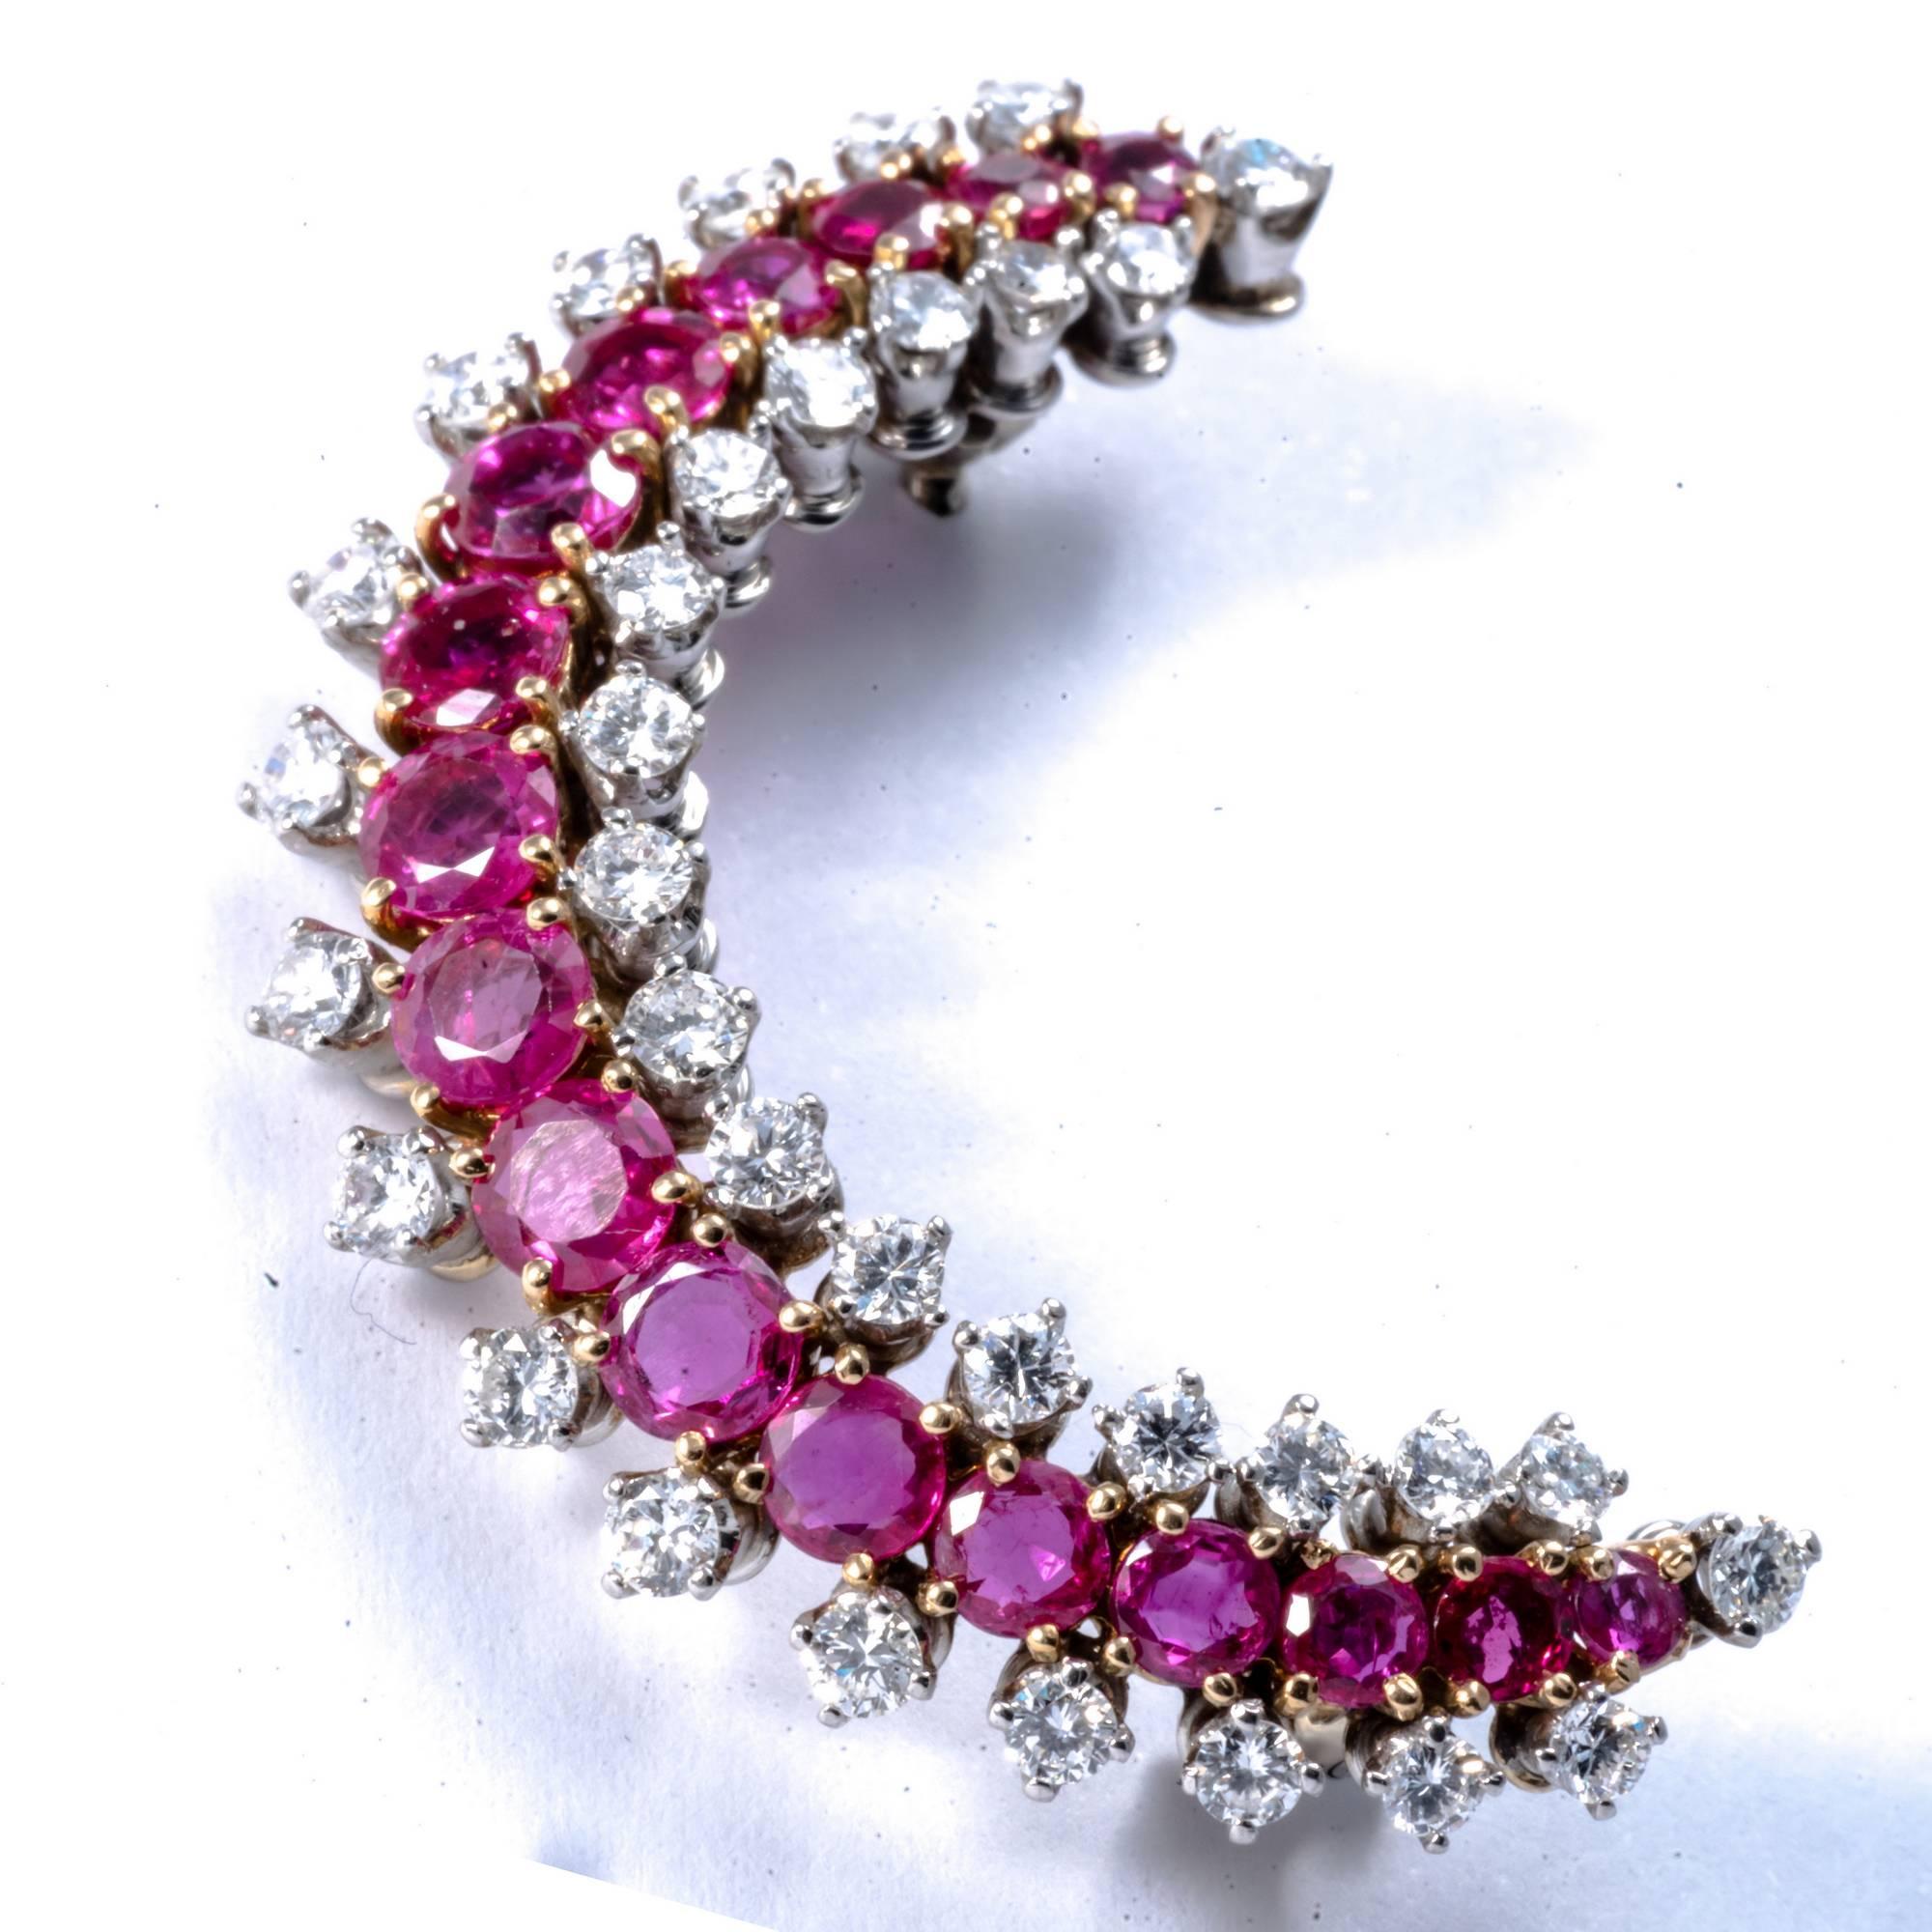 This 1950 original pin has the shape of the crescent moon and it is entirely hand made in yellow and white gold. The 34 diamonds and 17 rubies that enlighten the brooch, are perfectly combined for color and dimensions to emphasize the sleek and